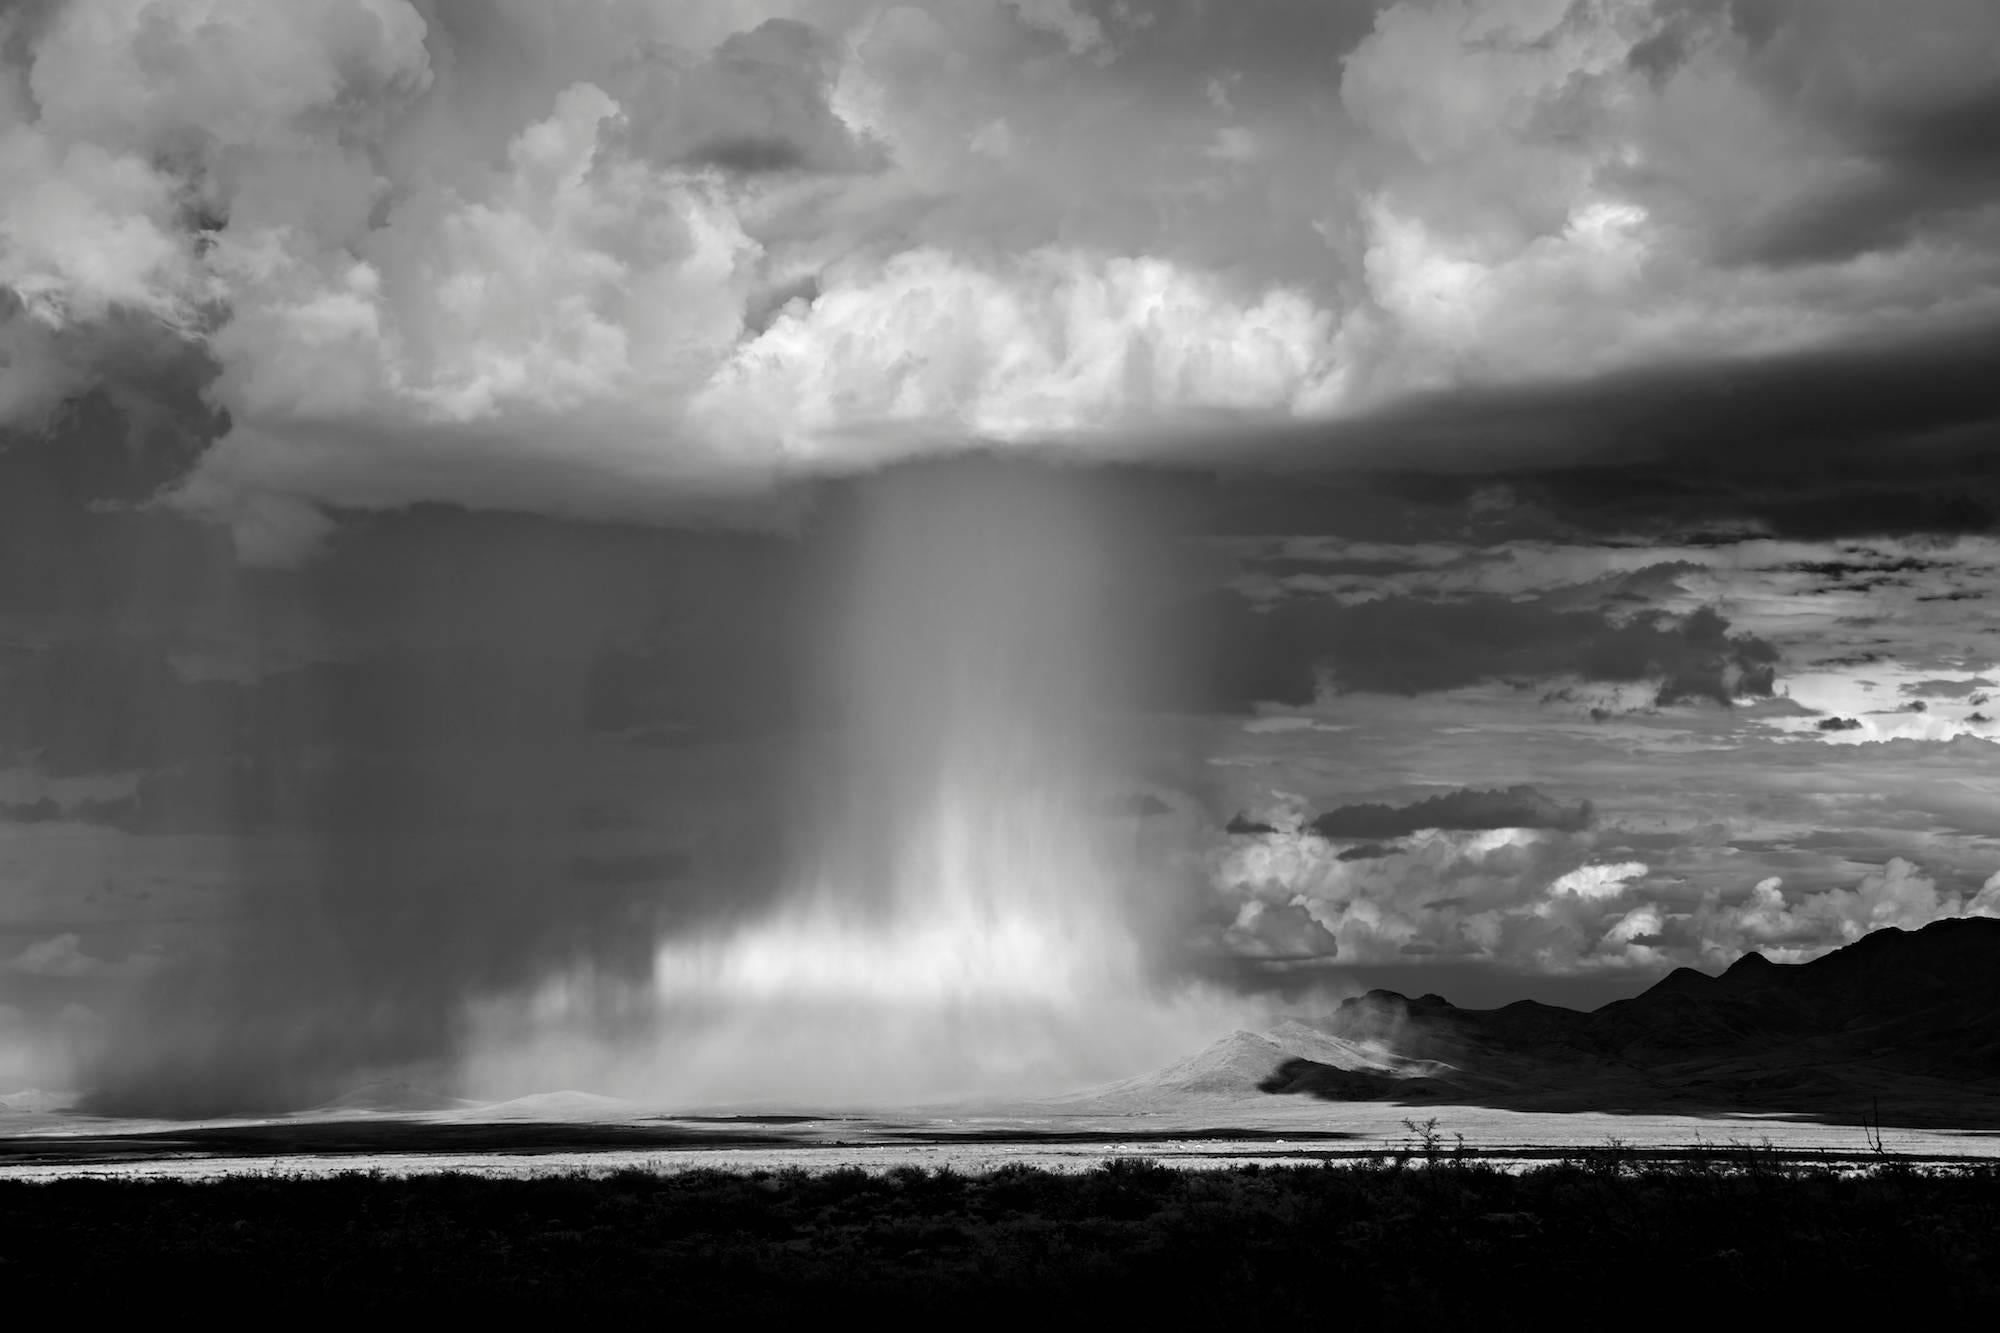 Mitch Dobrowner Black and White Photograph - Monsoon and Storm Over Town, limited edition photograph, signed, archival 